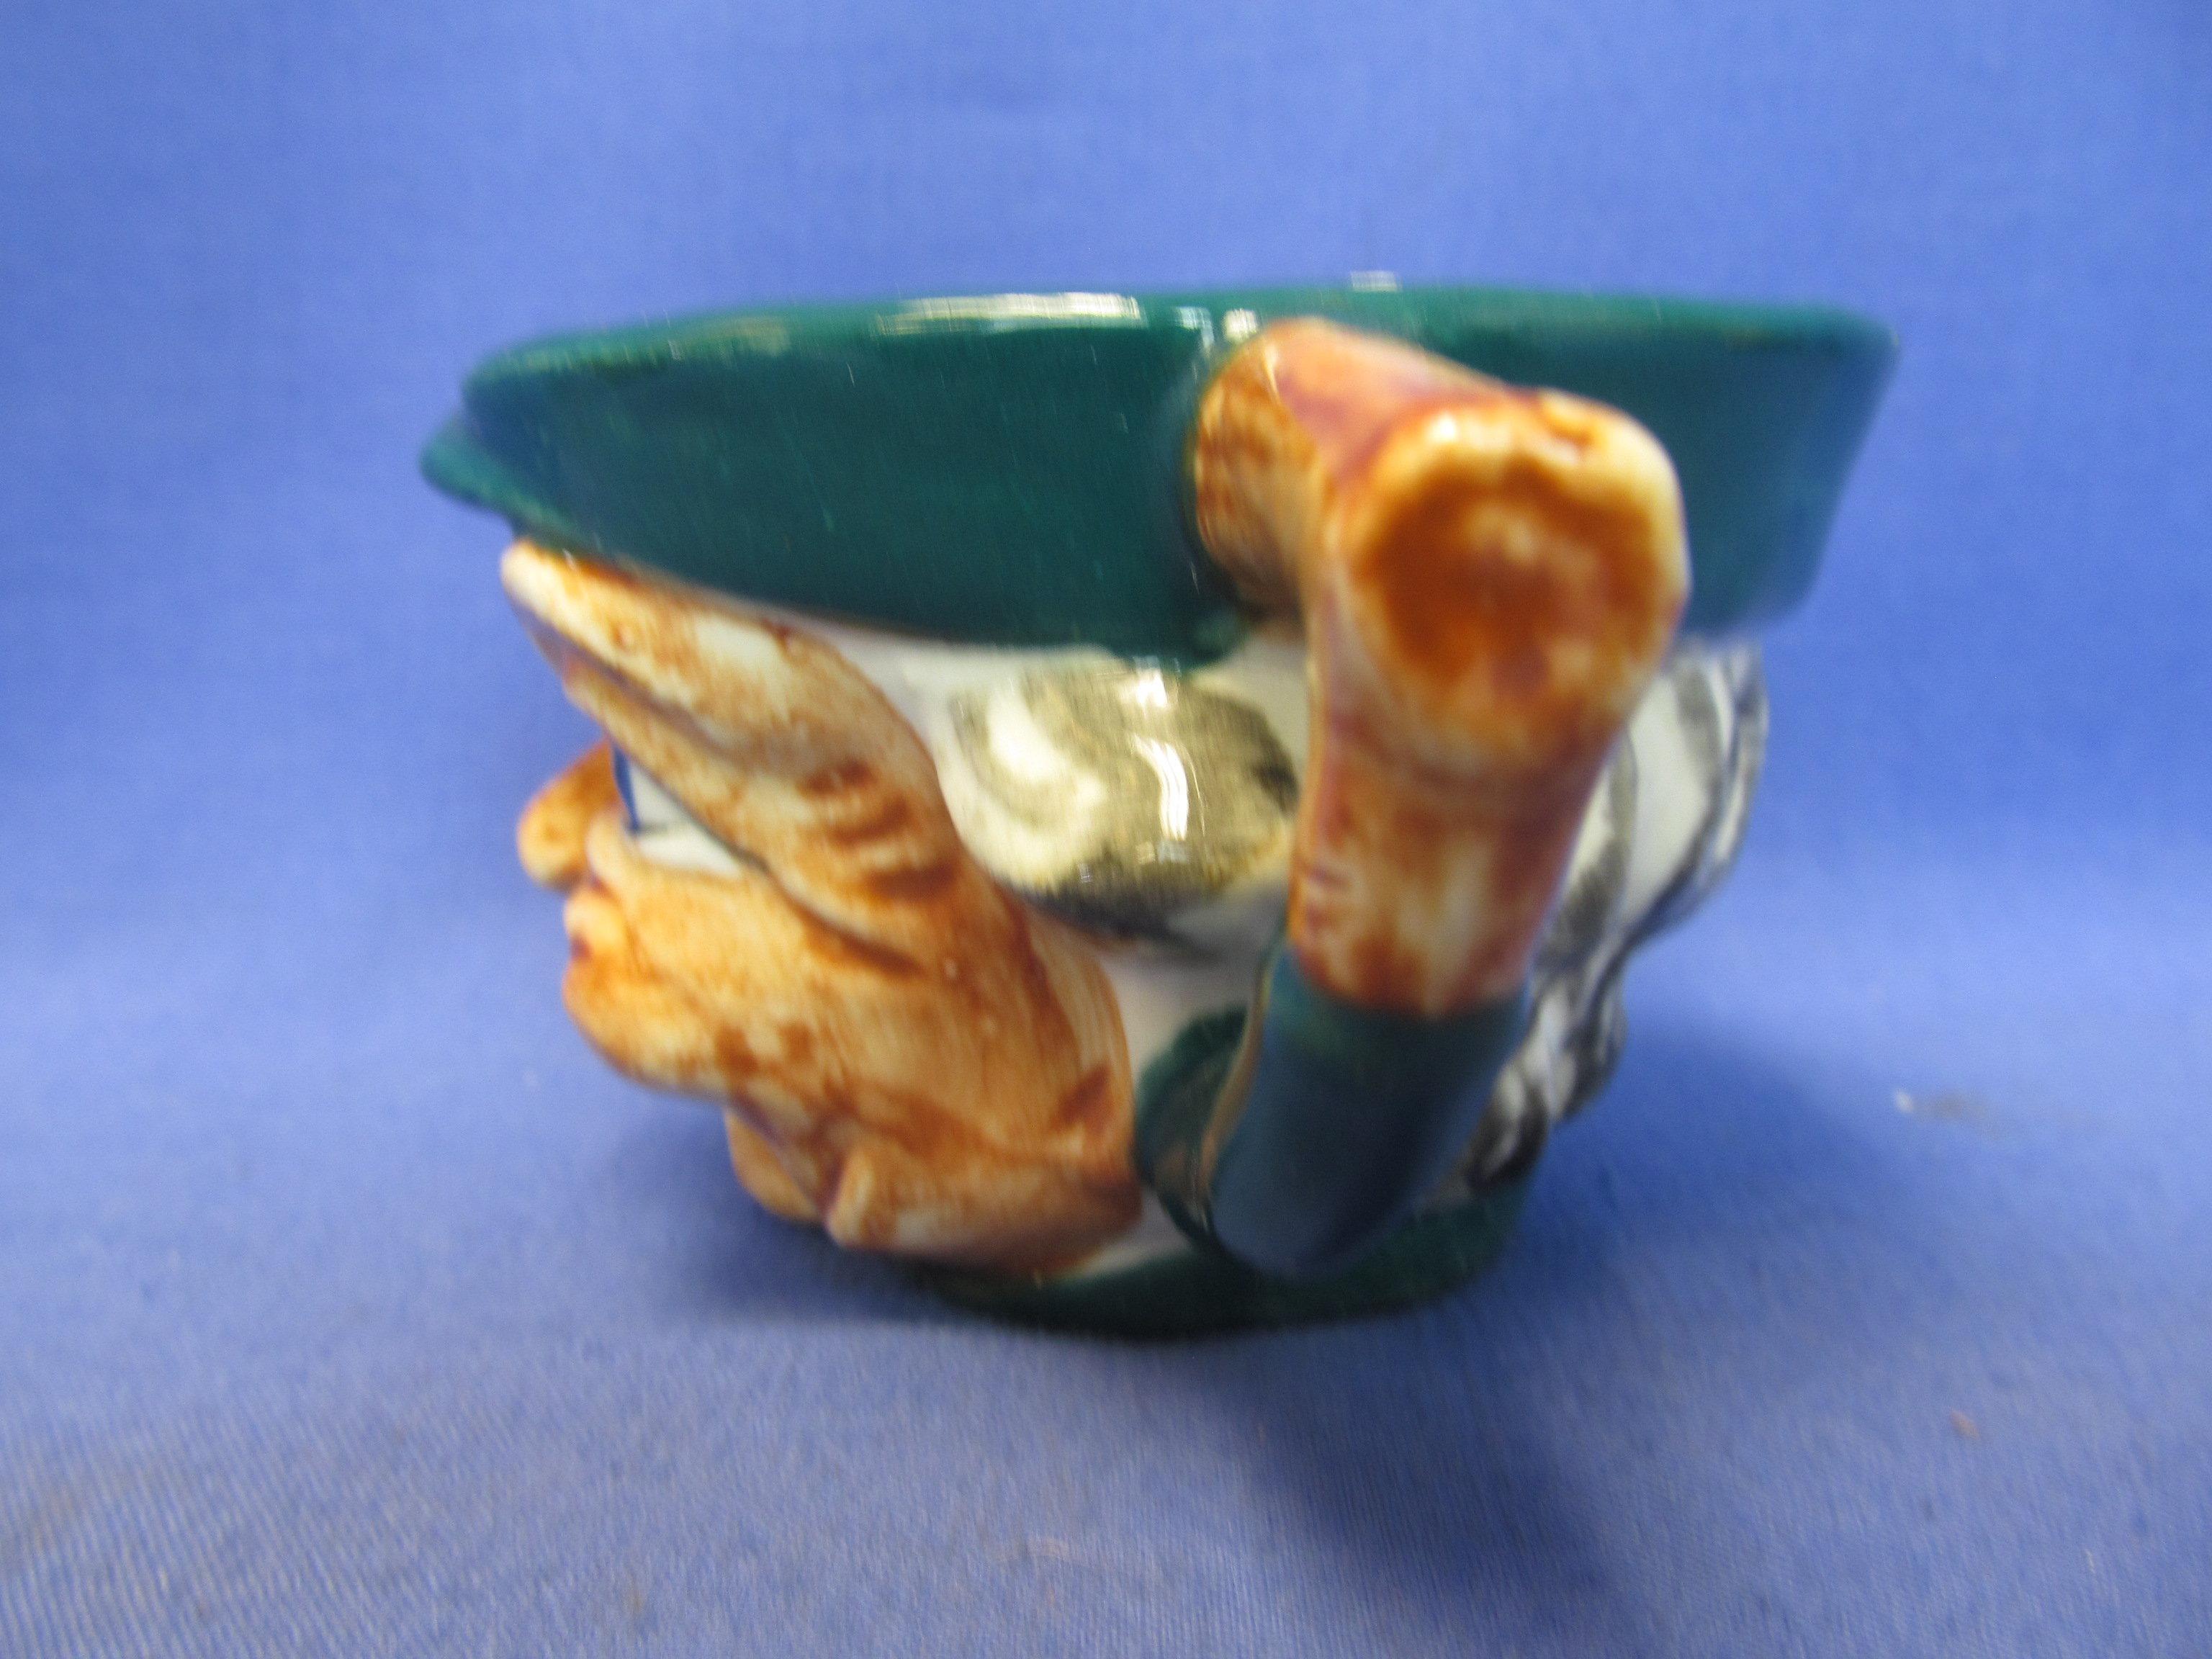 Set of 3 Face Cups – Charming 2 1/2” Deep Glazed Pottery Cups – In the style of Tobies – No markings